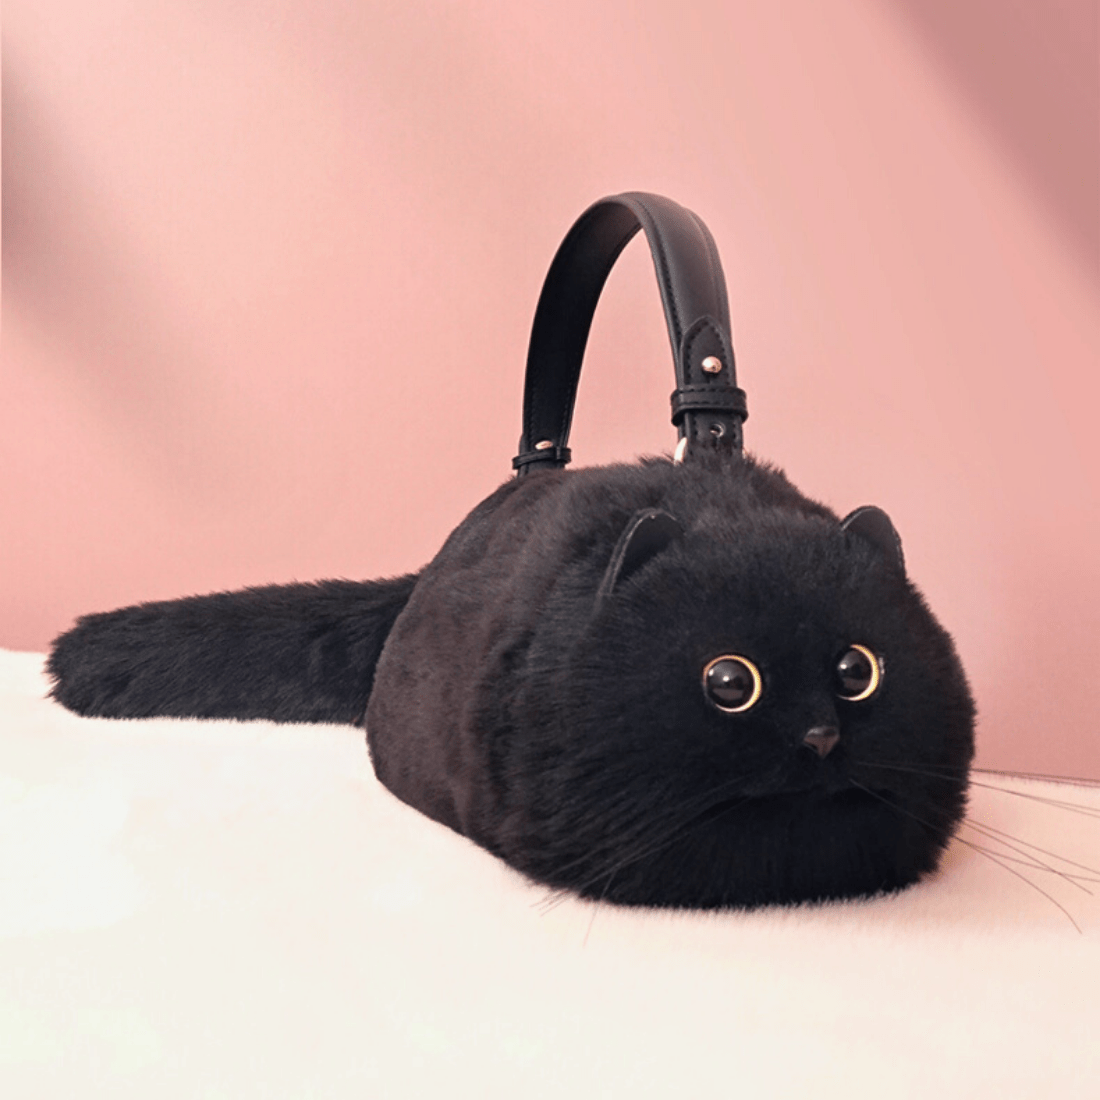 Buy Cat Leather Bag Online In India - Etsy India